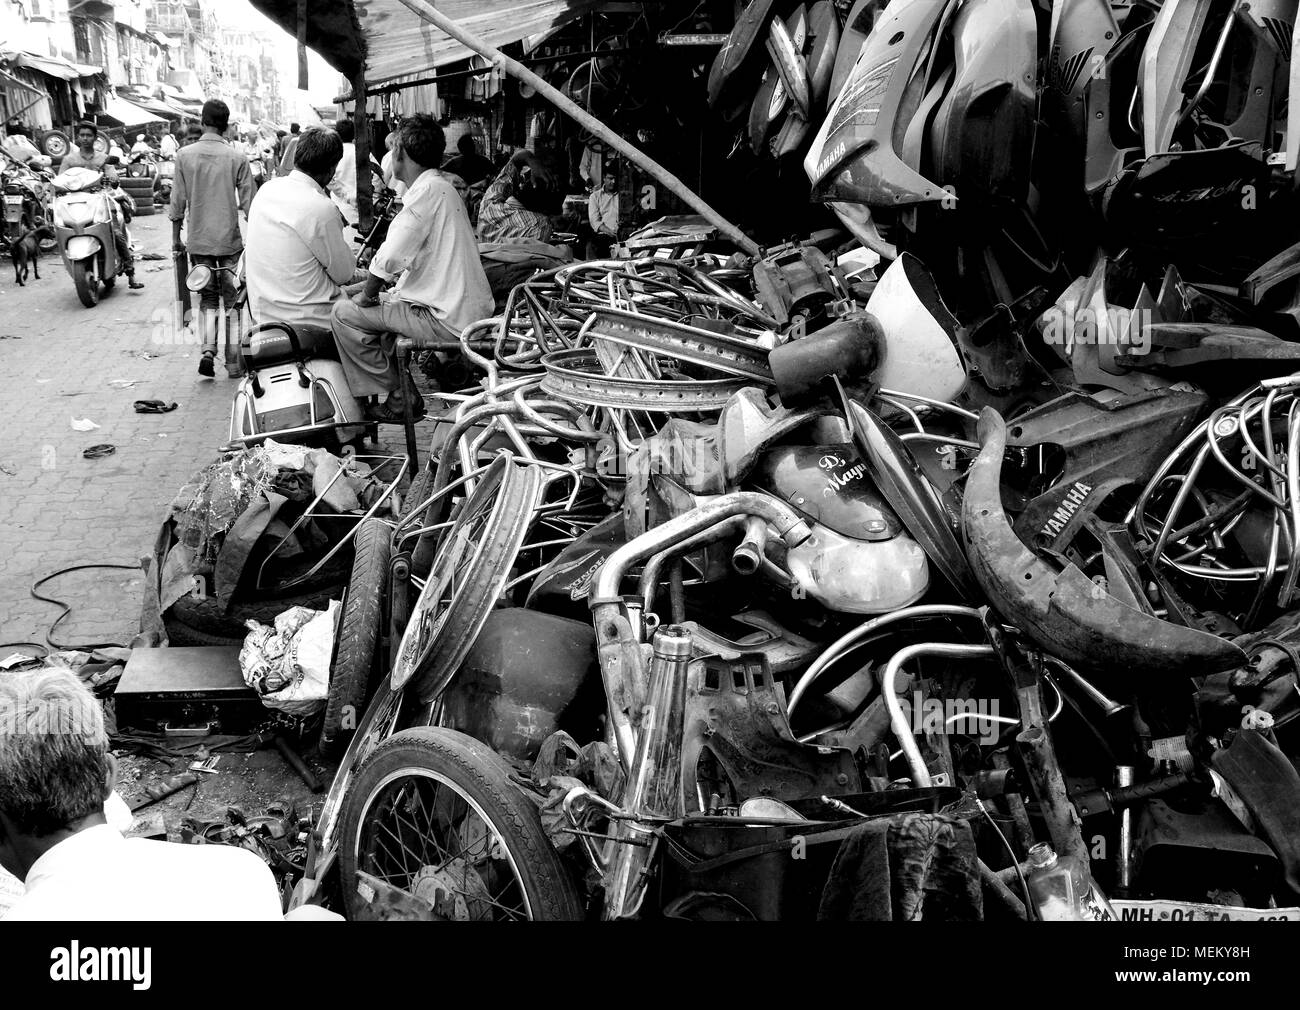 A stall selling motorbike parts on the Chor Bazaar, otherwise known as the Thieves Market, Mumbai, India Stock Photo